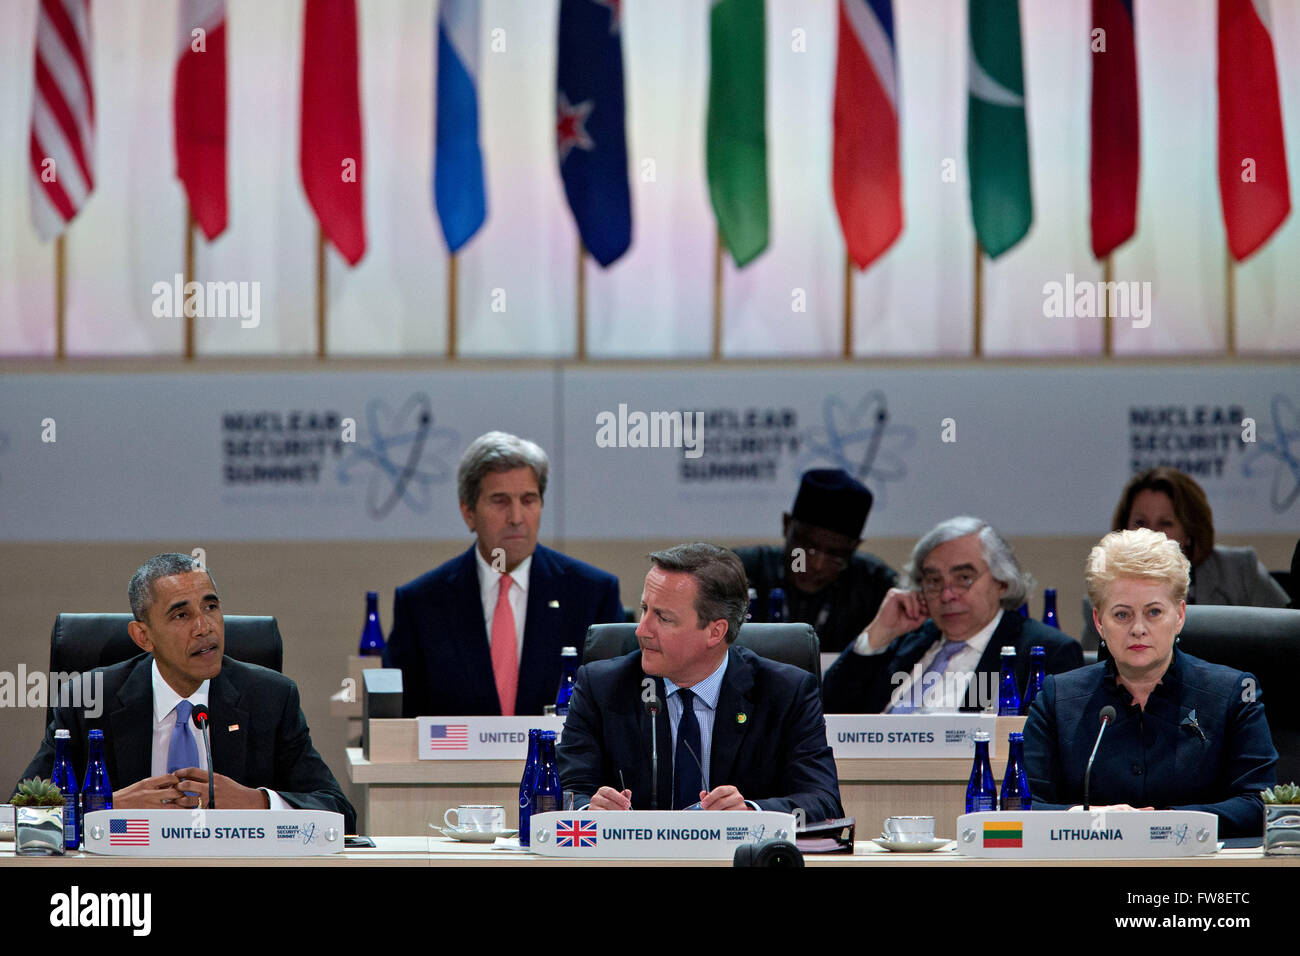 United States President Barack Obama, left, speaks during a closing session with David Cameron, U.K. prime minister, center, and Dalia Grybauskaite, Lithuania's president, at the Nuclear Security Summit in Washington, DC, U.S., on Friday, April 1, 2016. After a spate of terrorist attacks from Europe to Africa, Obama is rallying international support during the summit for an effort to keep Islamic State and similar groups from obtaining nuclear material and other weapons of mass destruction. Seated behind them are US Secretary of State John Kerry and US Secretary of Energy Ernest Moniz. Credi Stock Photo